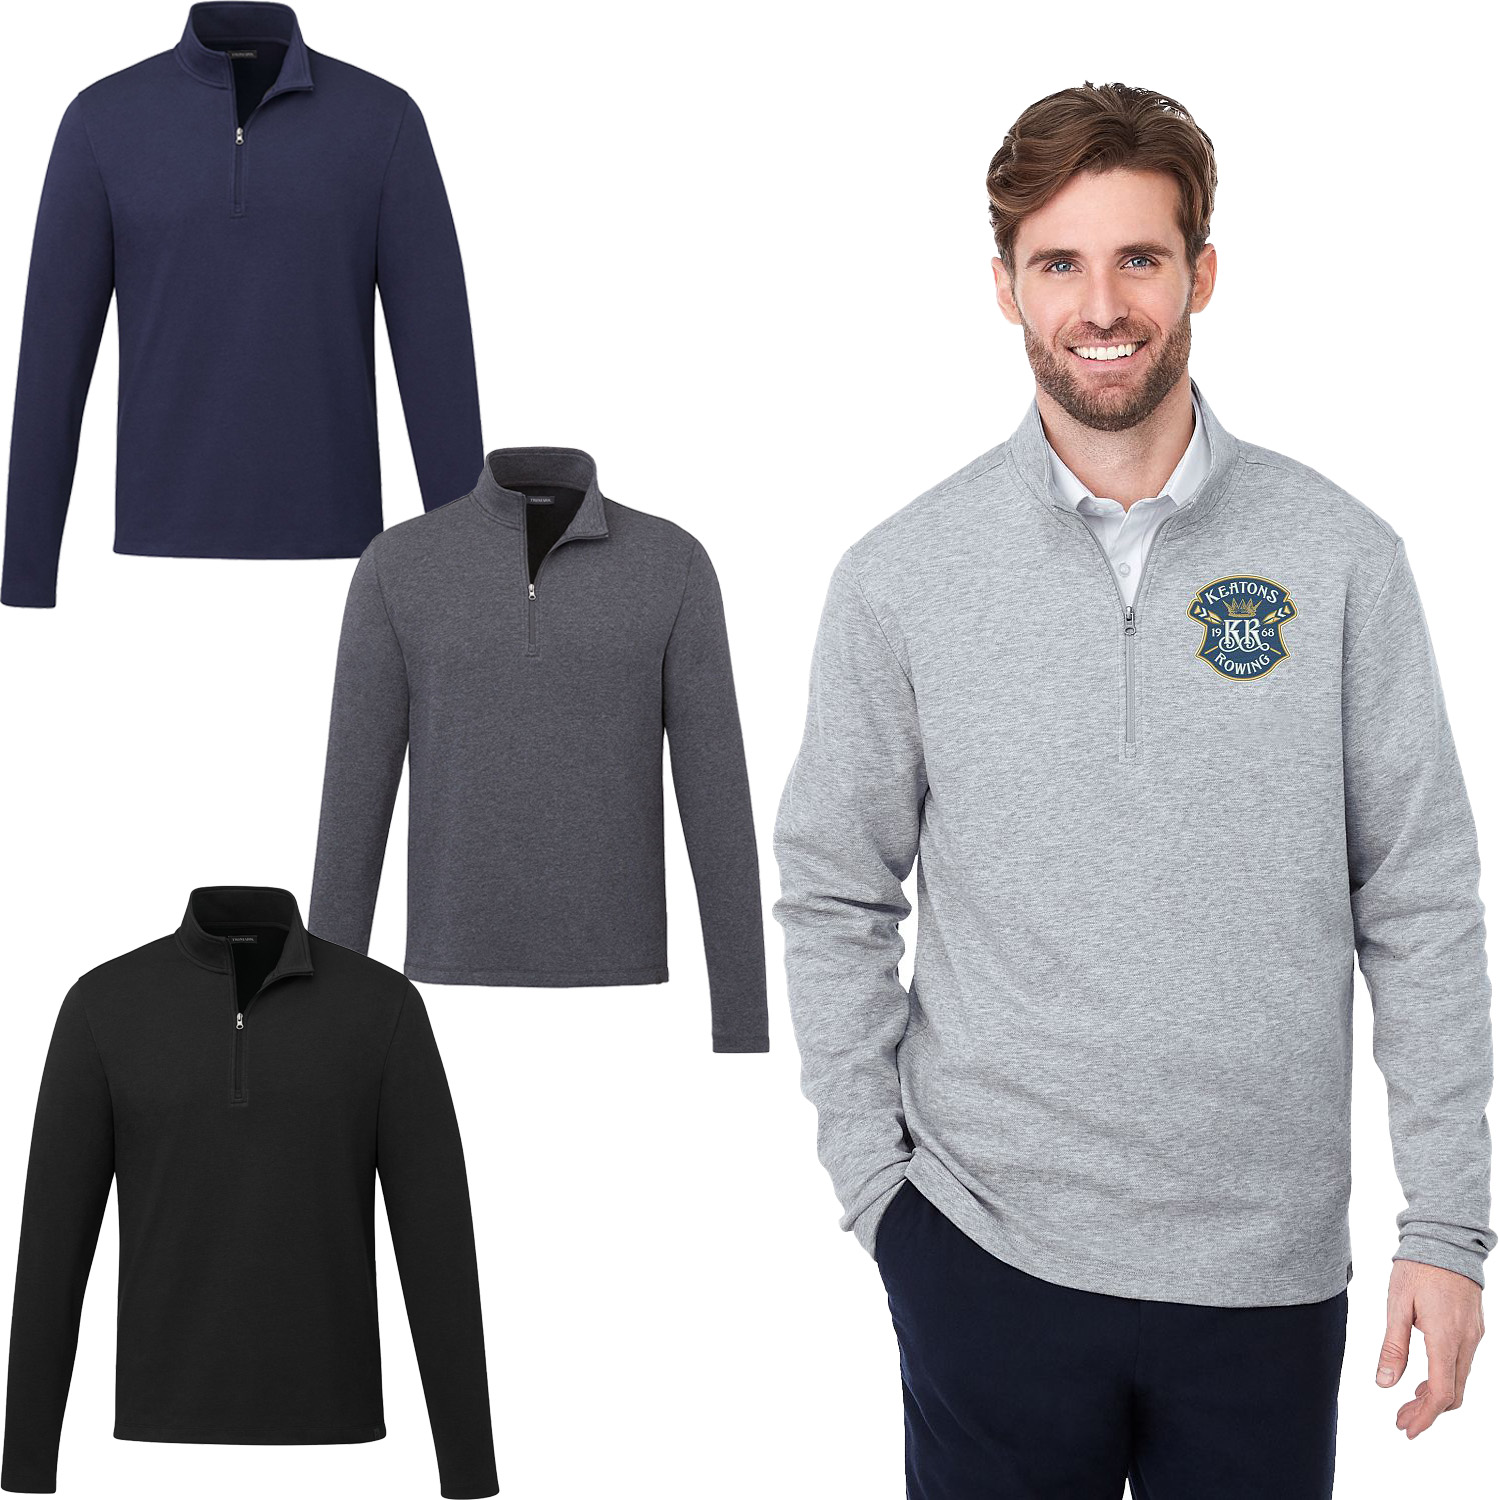 Men's Sustainable Eco Knit Quarter Zip | Recycled